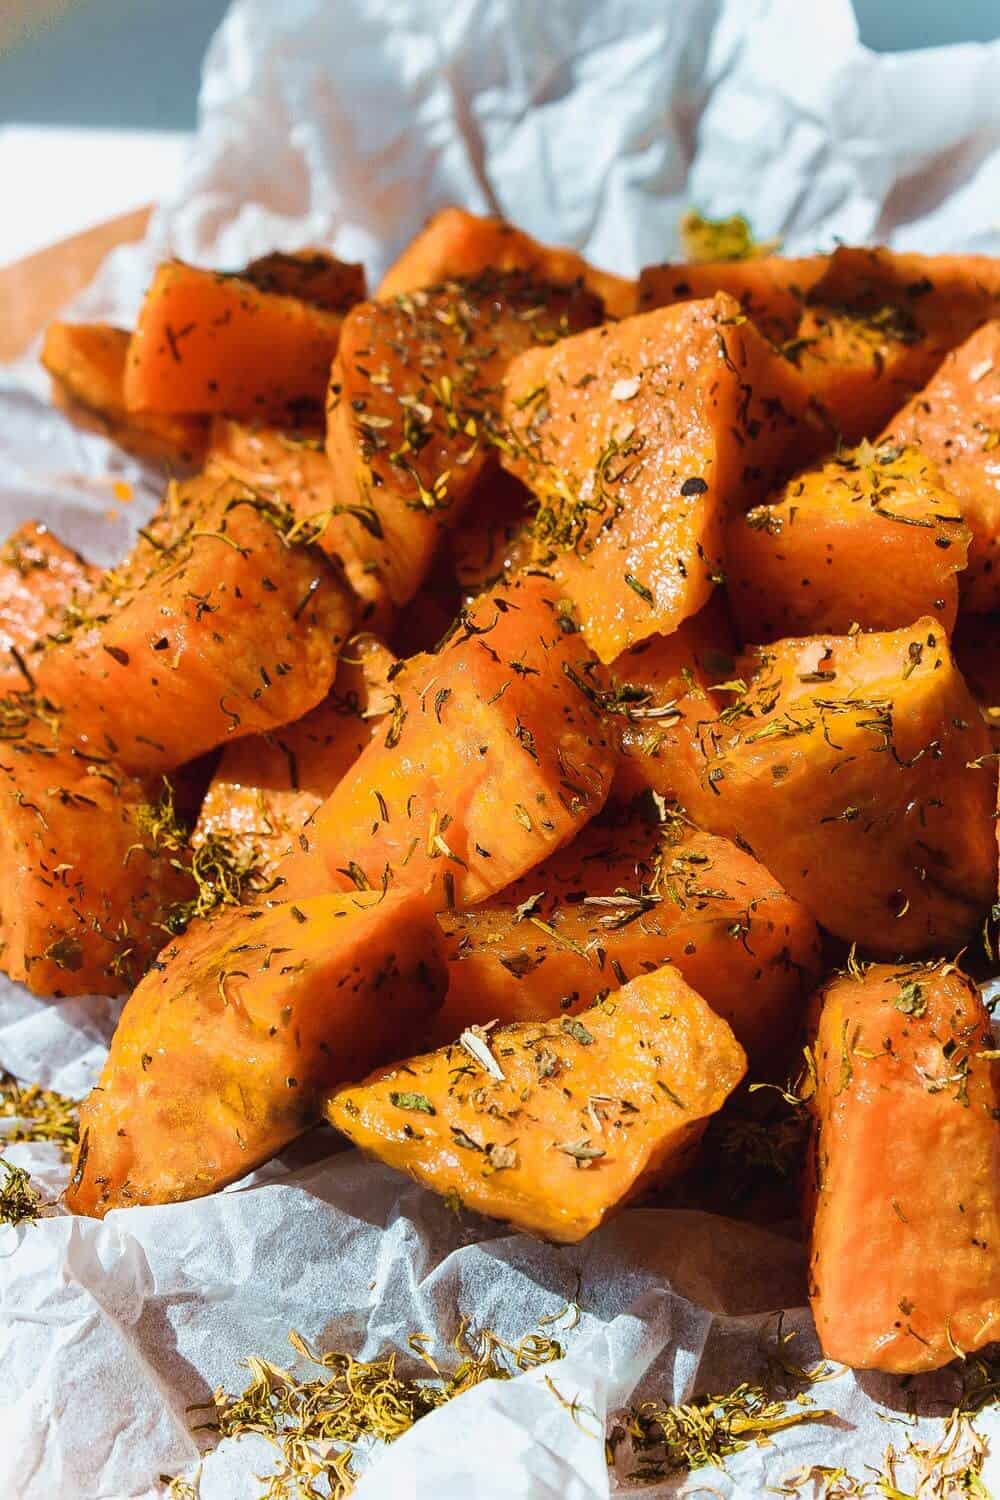 Diced sweet potatoes with spices